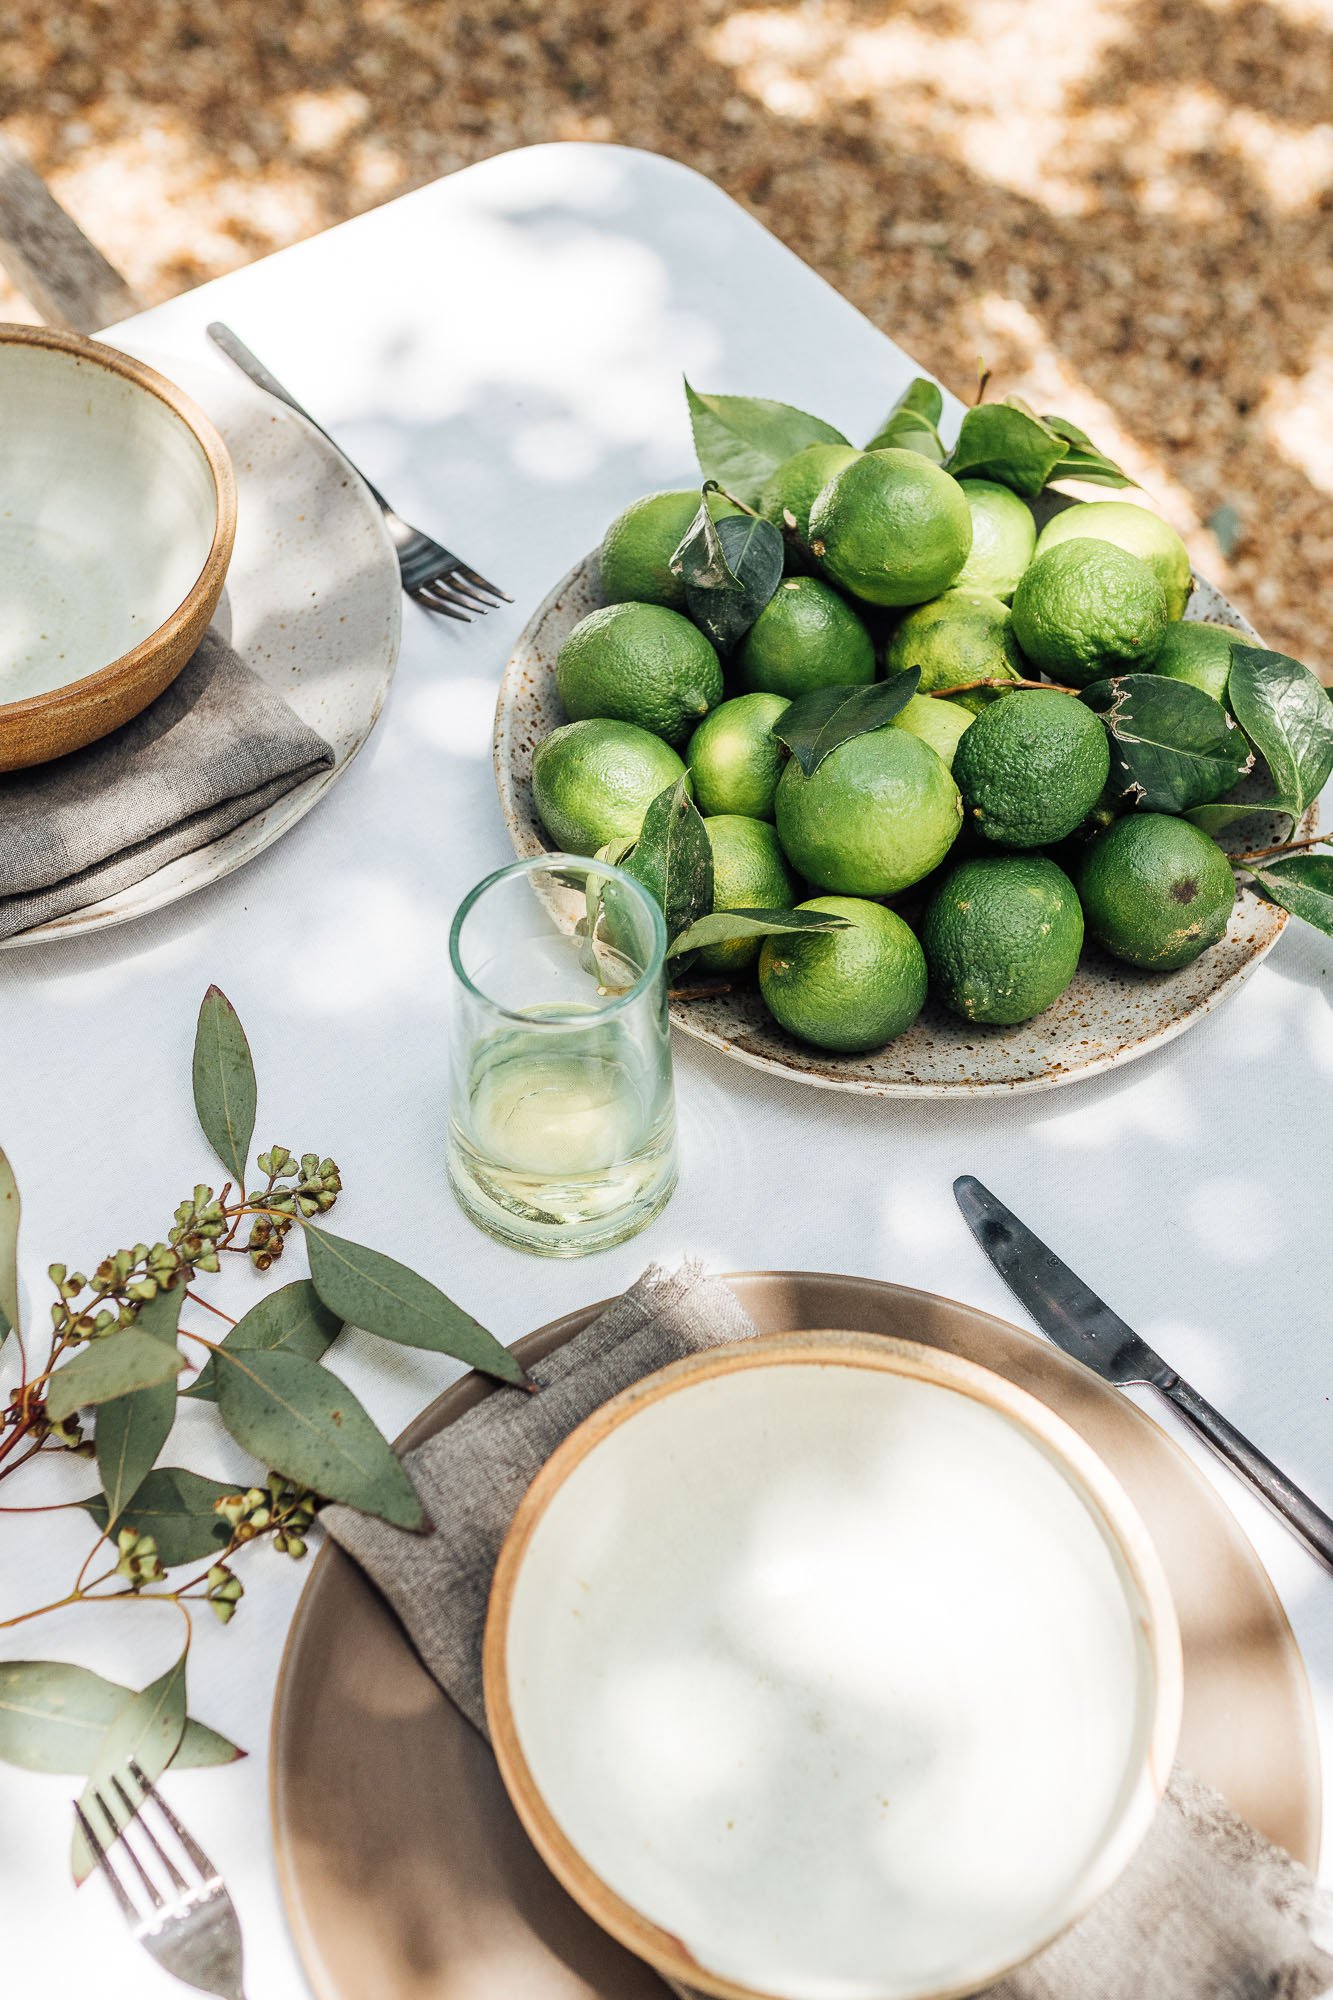 summer table setting ideas for a backyard dinner party, tulips and limes, camille styles backyard